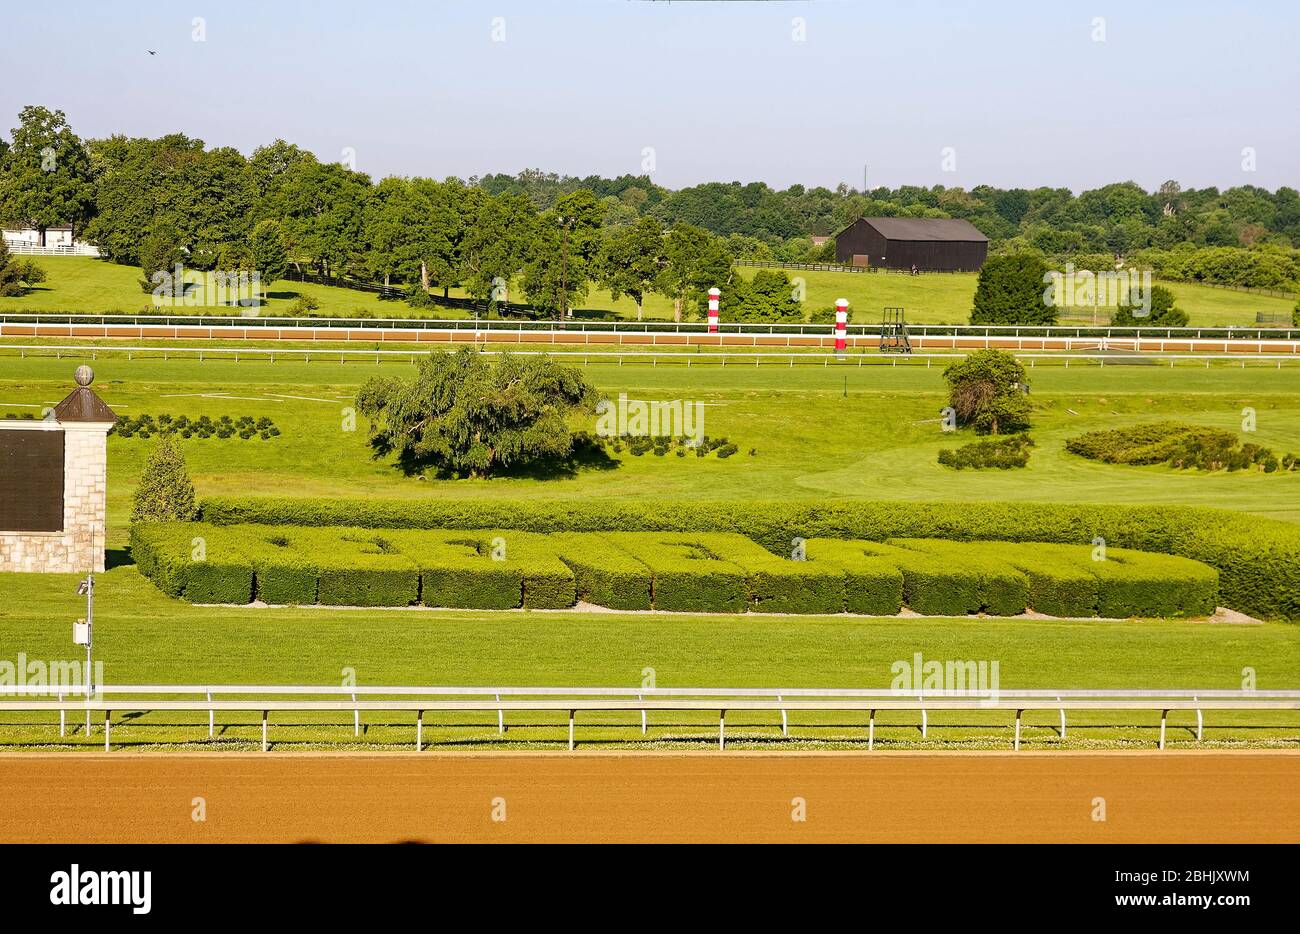 Keeneland Racetrack; early morning, golden light, name in shrubs, view from grandstand, sun, dirt track, railings, green grass, sport venue, Na Stock Photo